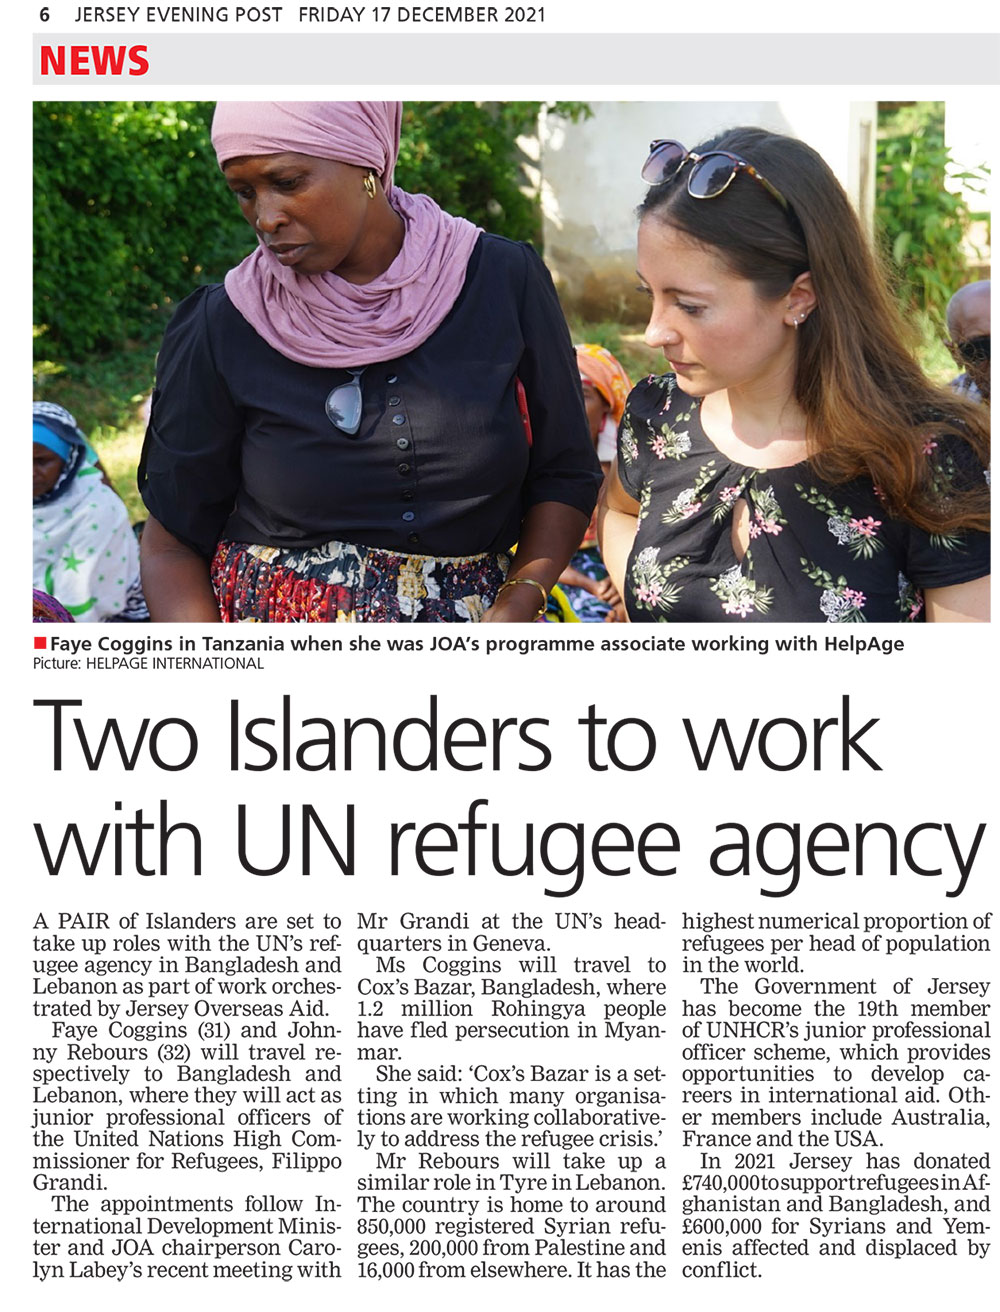 local appointees as UN refugee staff